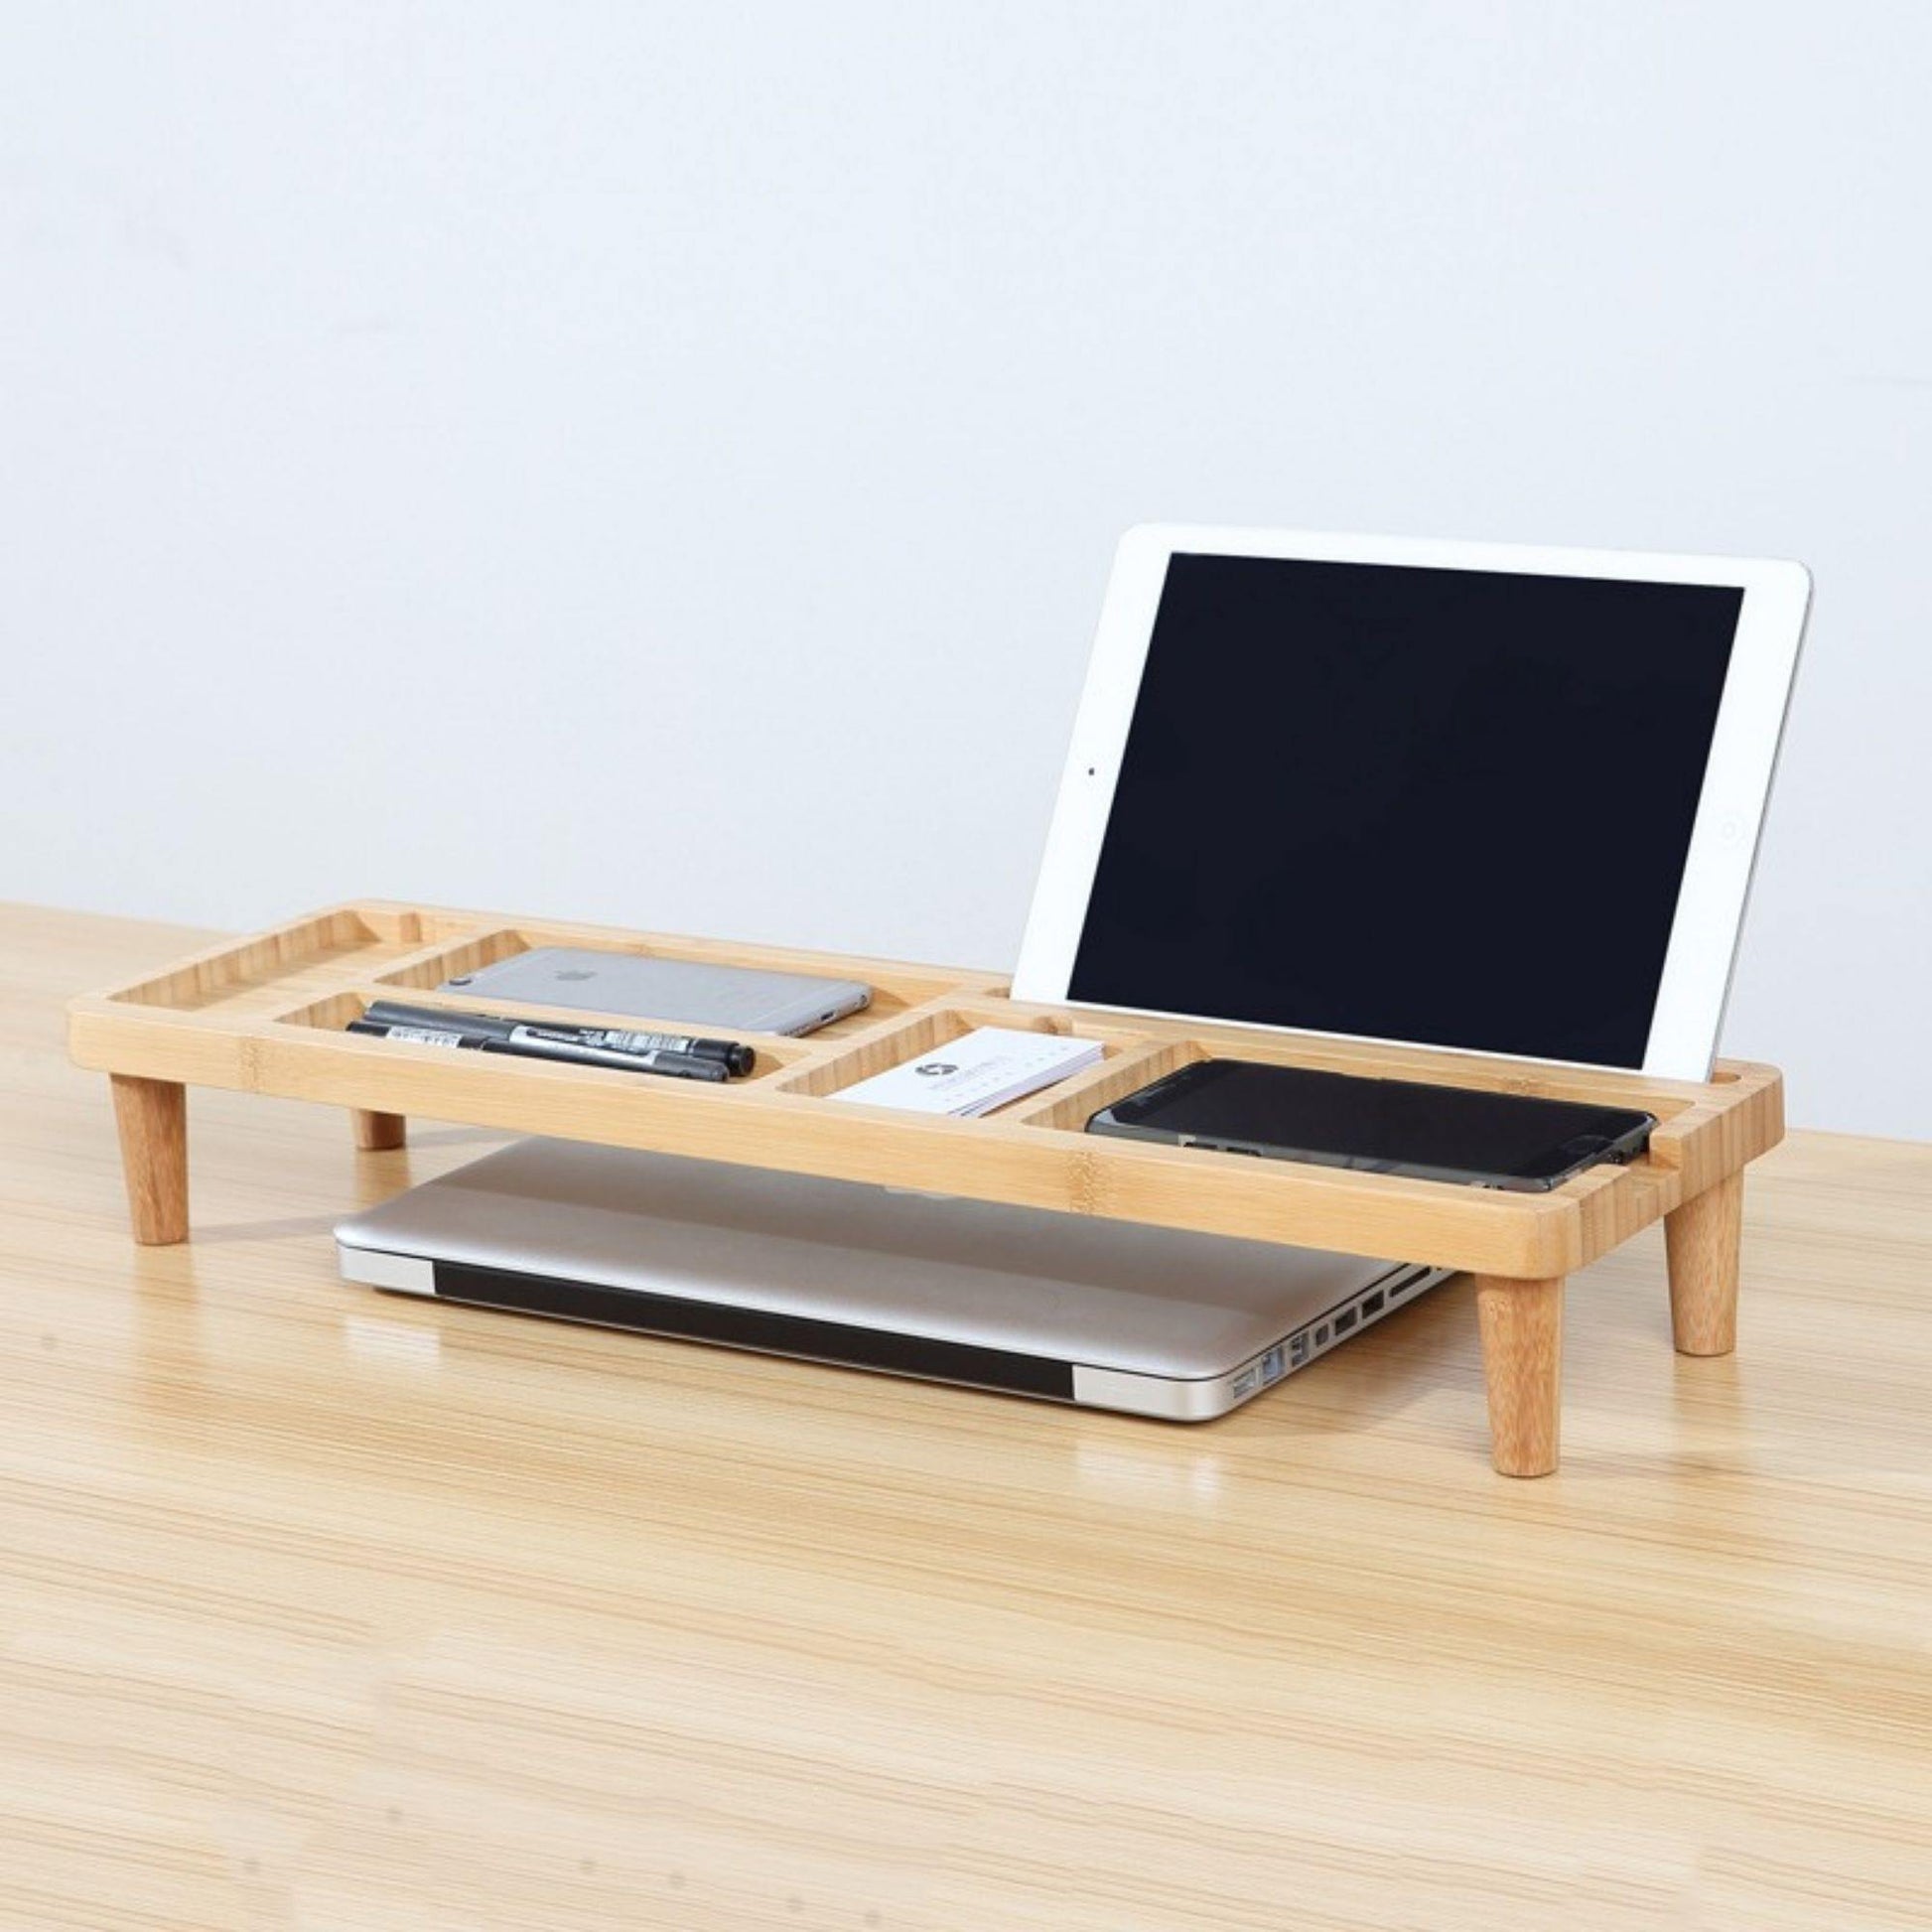 Can be used for iPad or iPhone docking station.